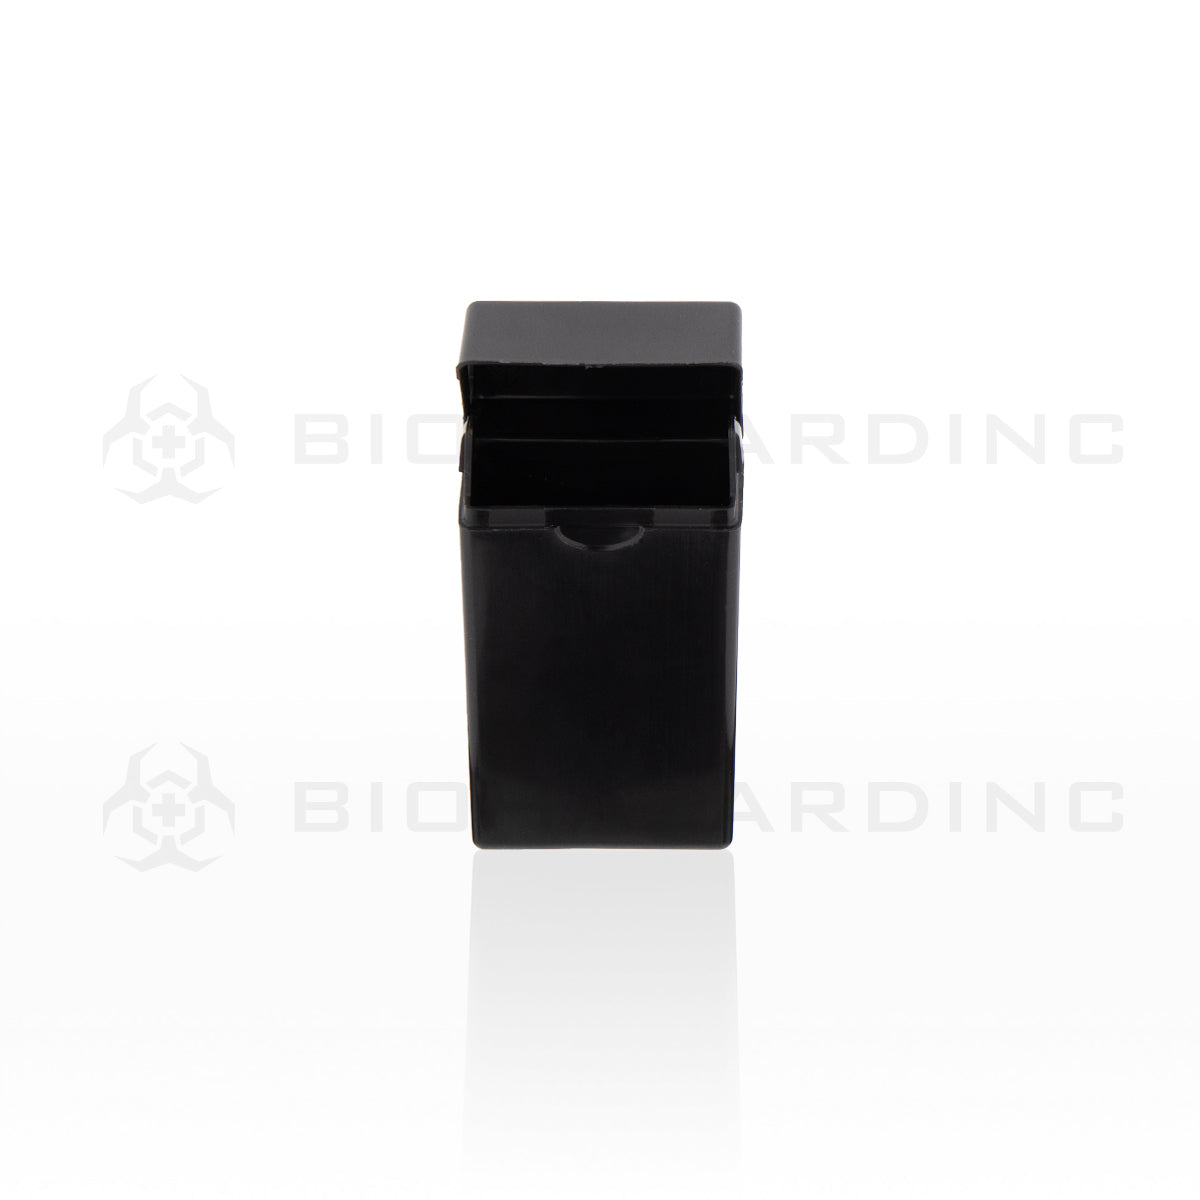 Preroll Cases | 85mm Portable Joint Boxes | 100 Count - Black Pre Roll Case Biohazard Inc   